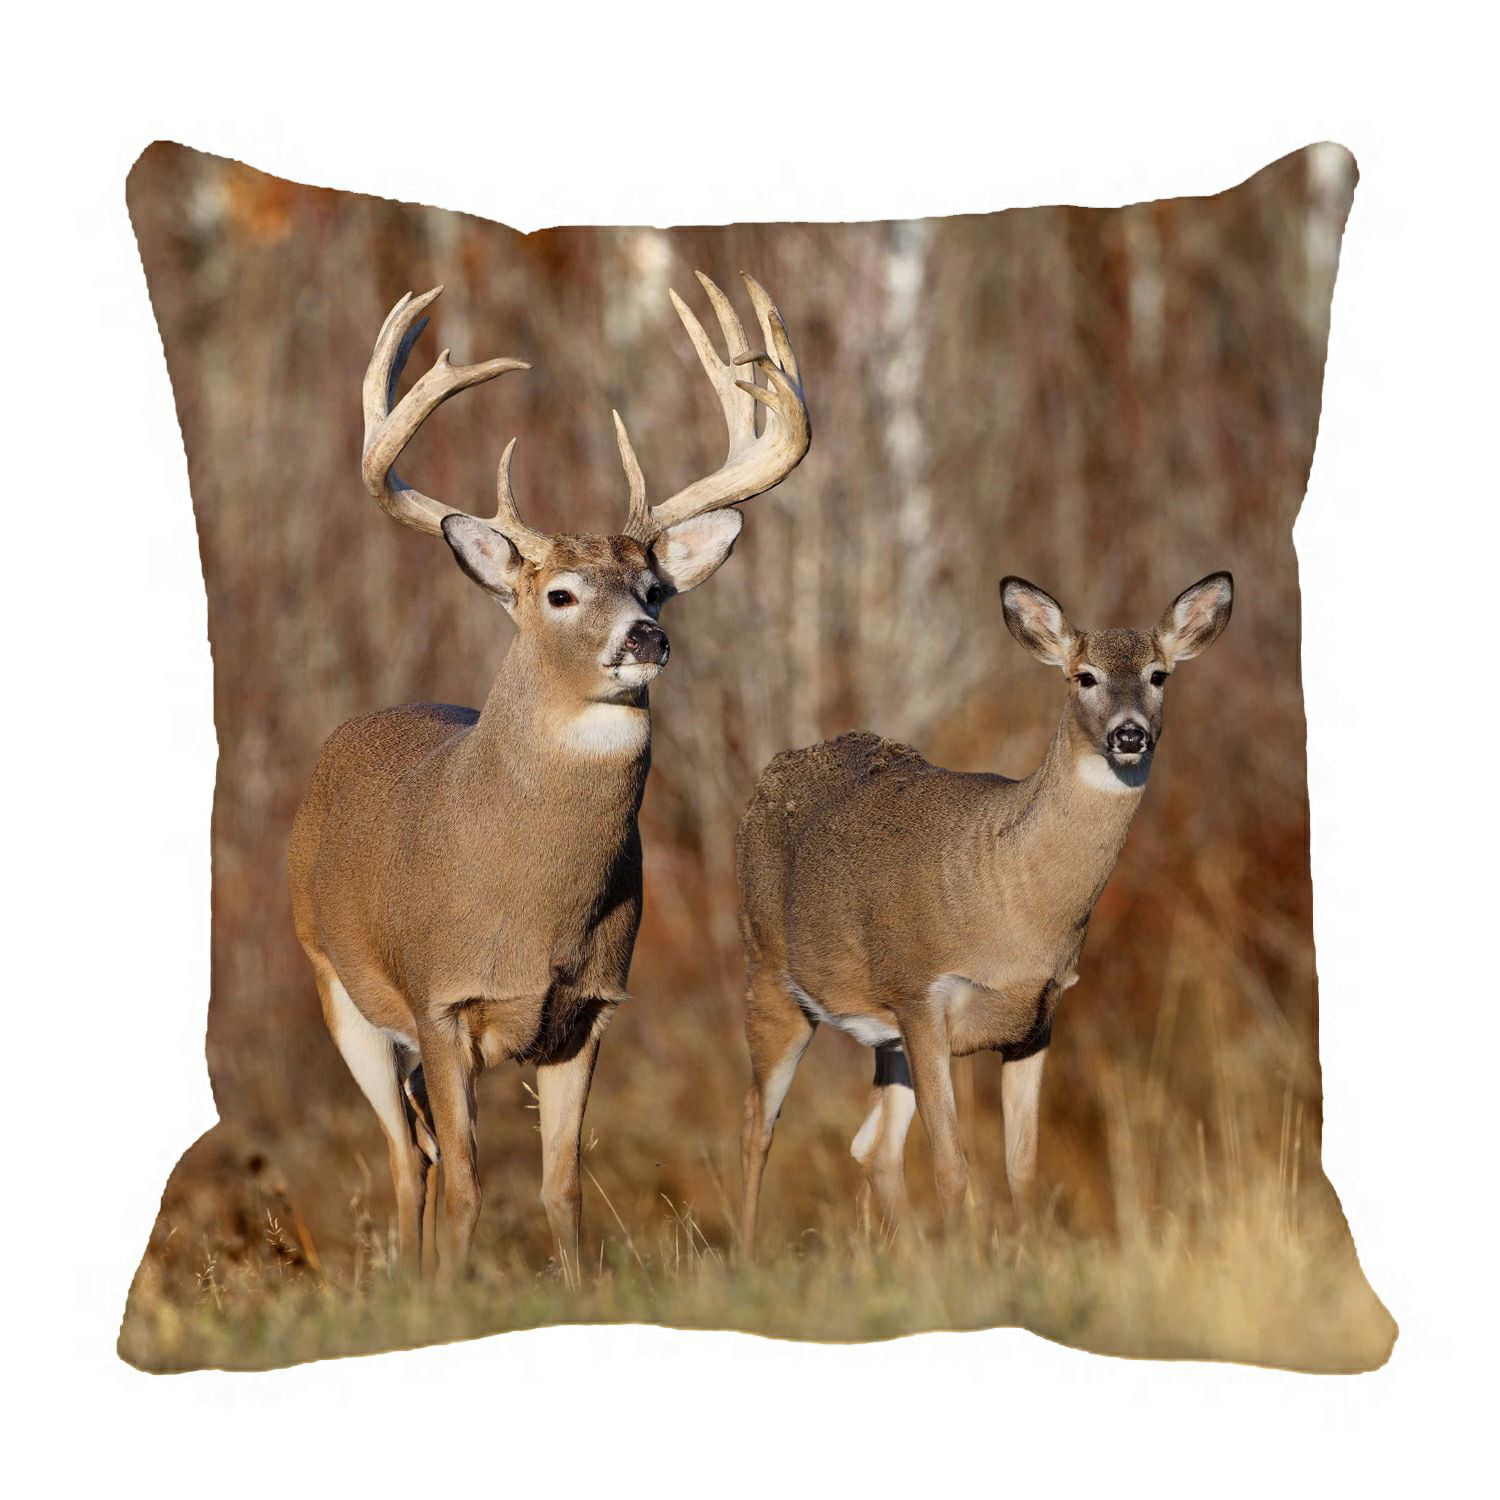 HGOD DESIGNS Fashion Deer Sofa Bed Home Decor Pillow Case Forest Deer with Bird Art Cushion Cover Cotton Linen 18 X 18 Inch 